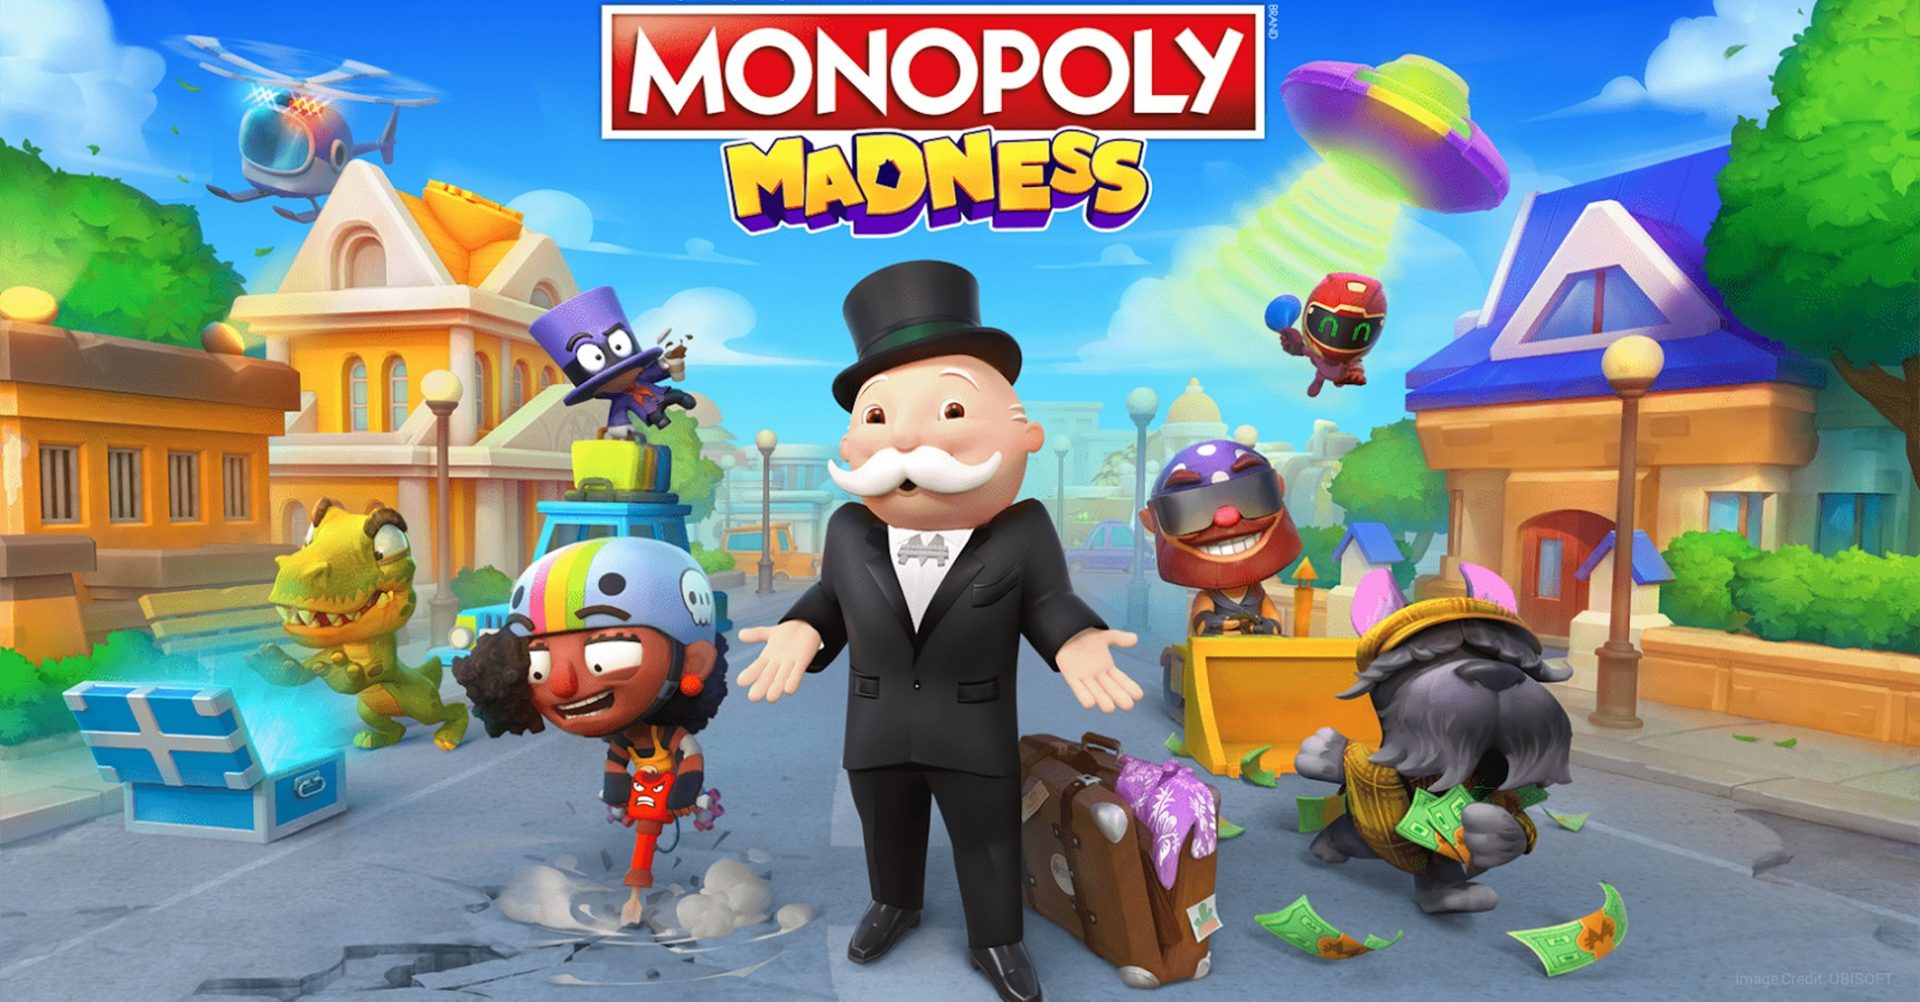 MONOPOLY Madness Brings The Monopoly Experience Into The Arena